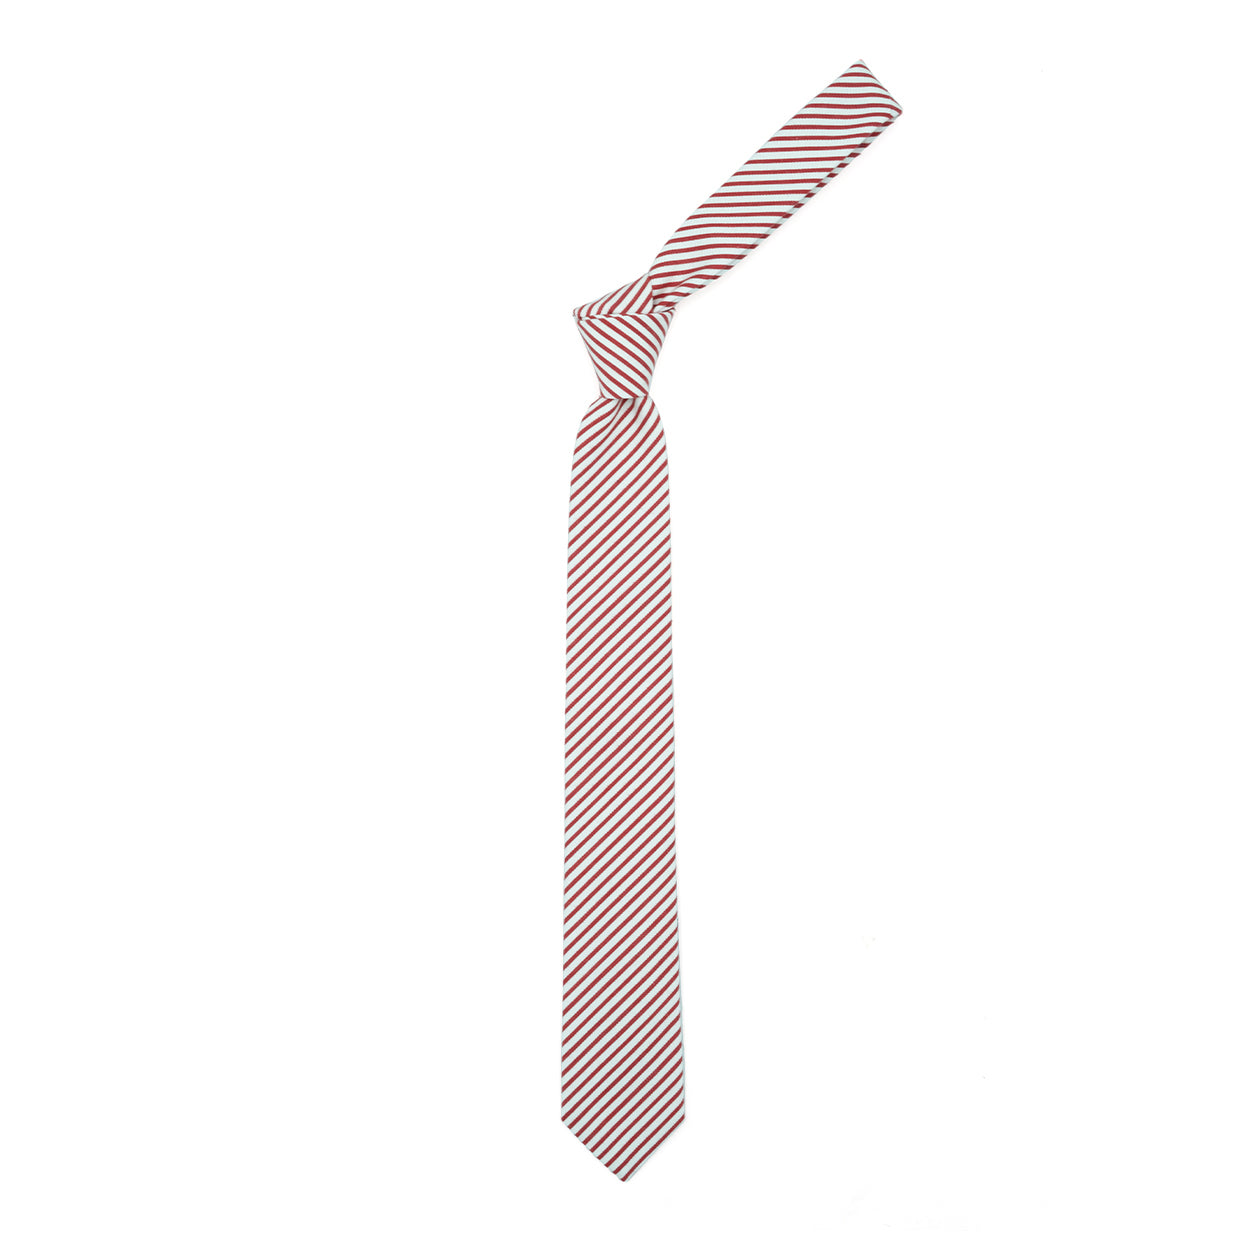 Cream tie with red stripes